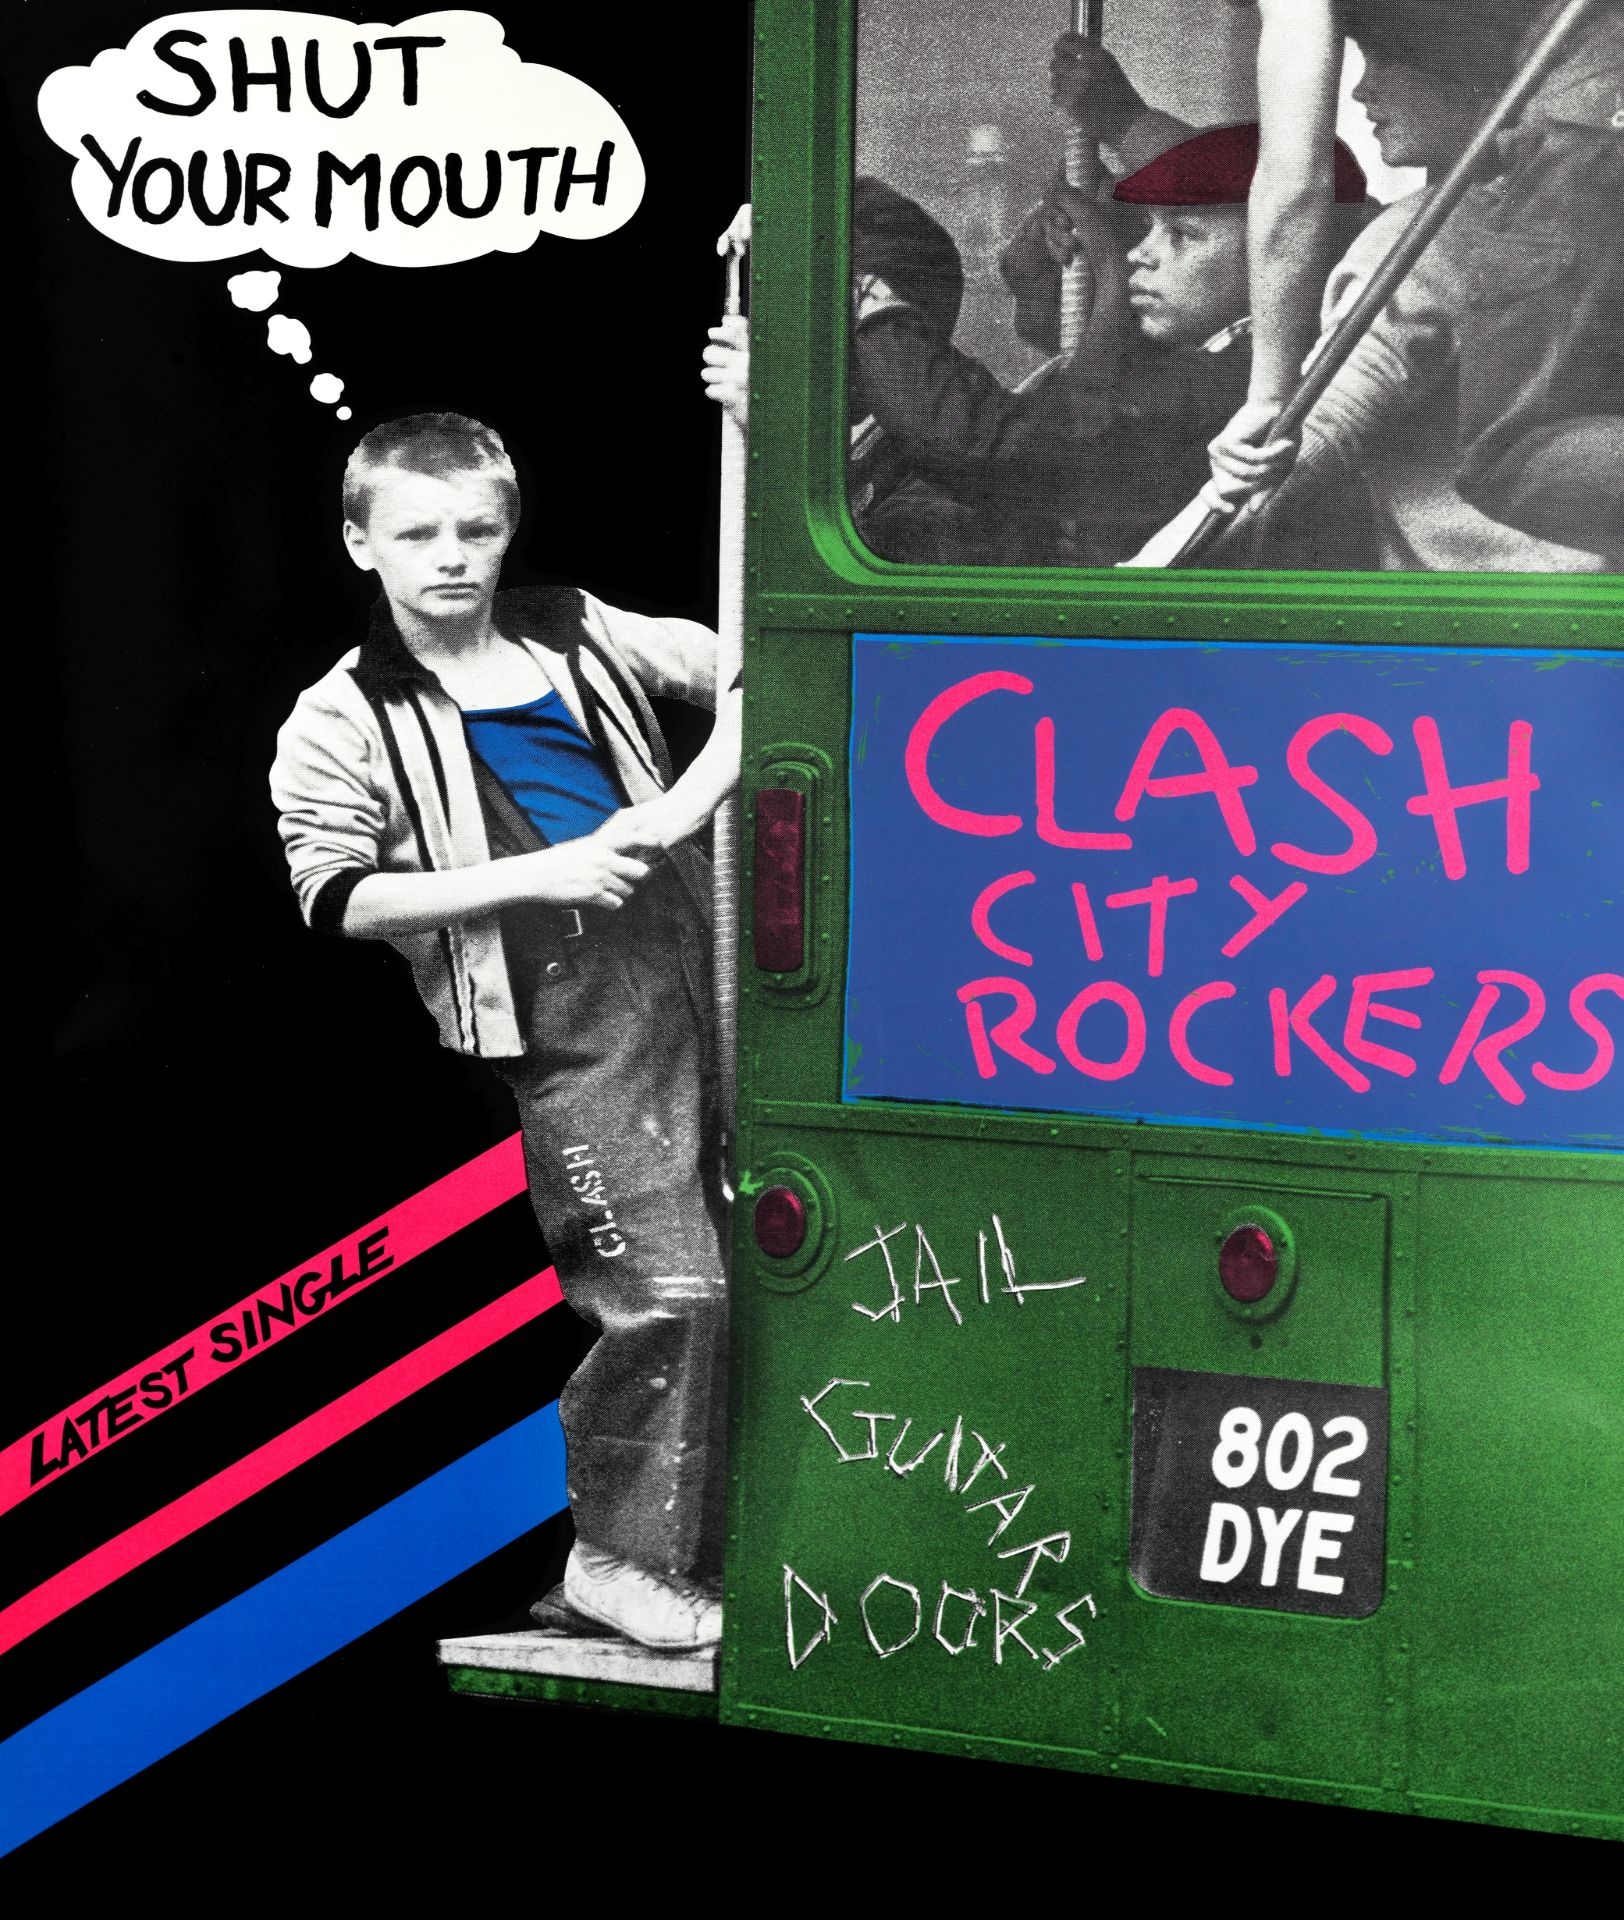 The Clash A poster for Clash City Rockers / Jail Guitar Doors, 1977